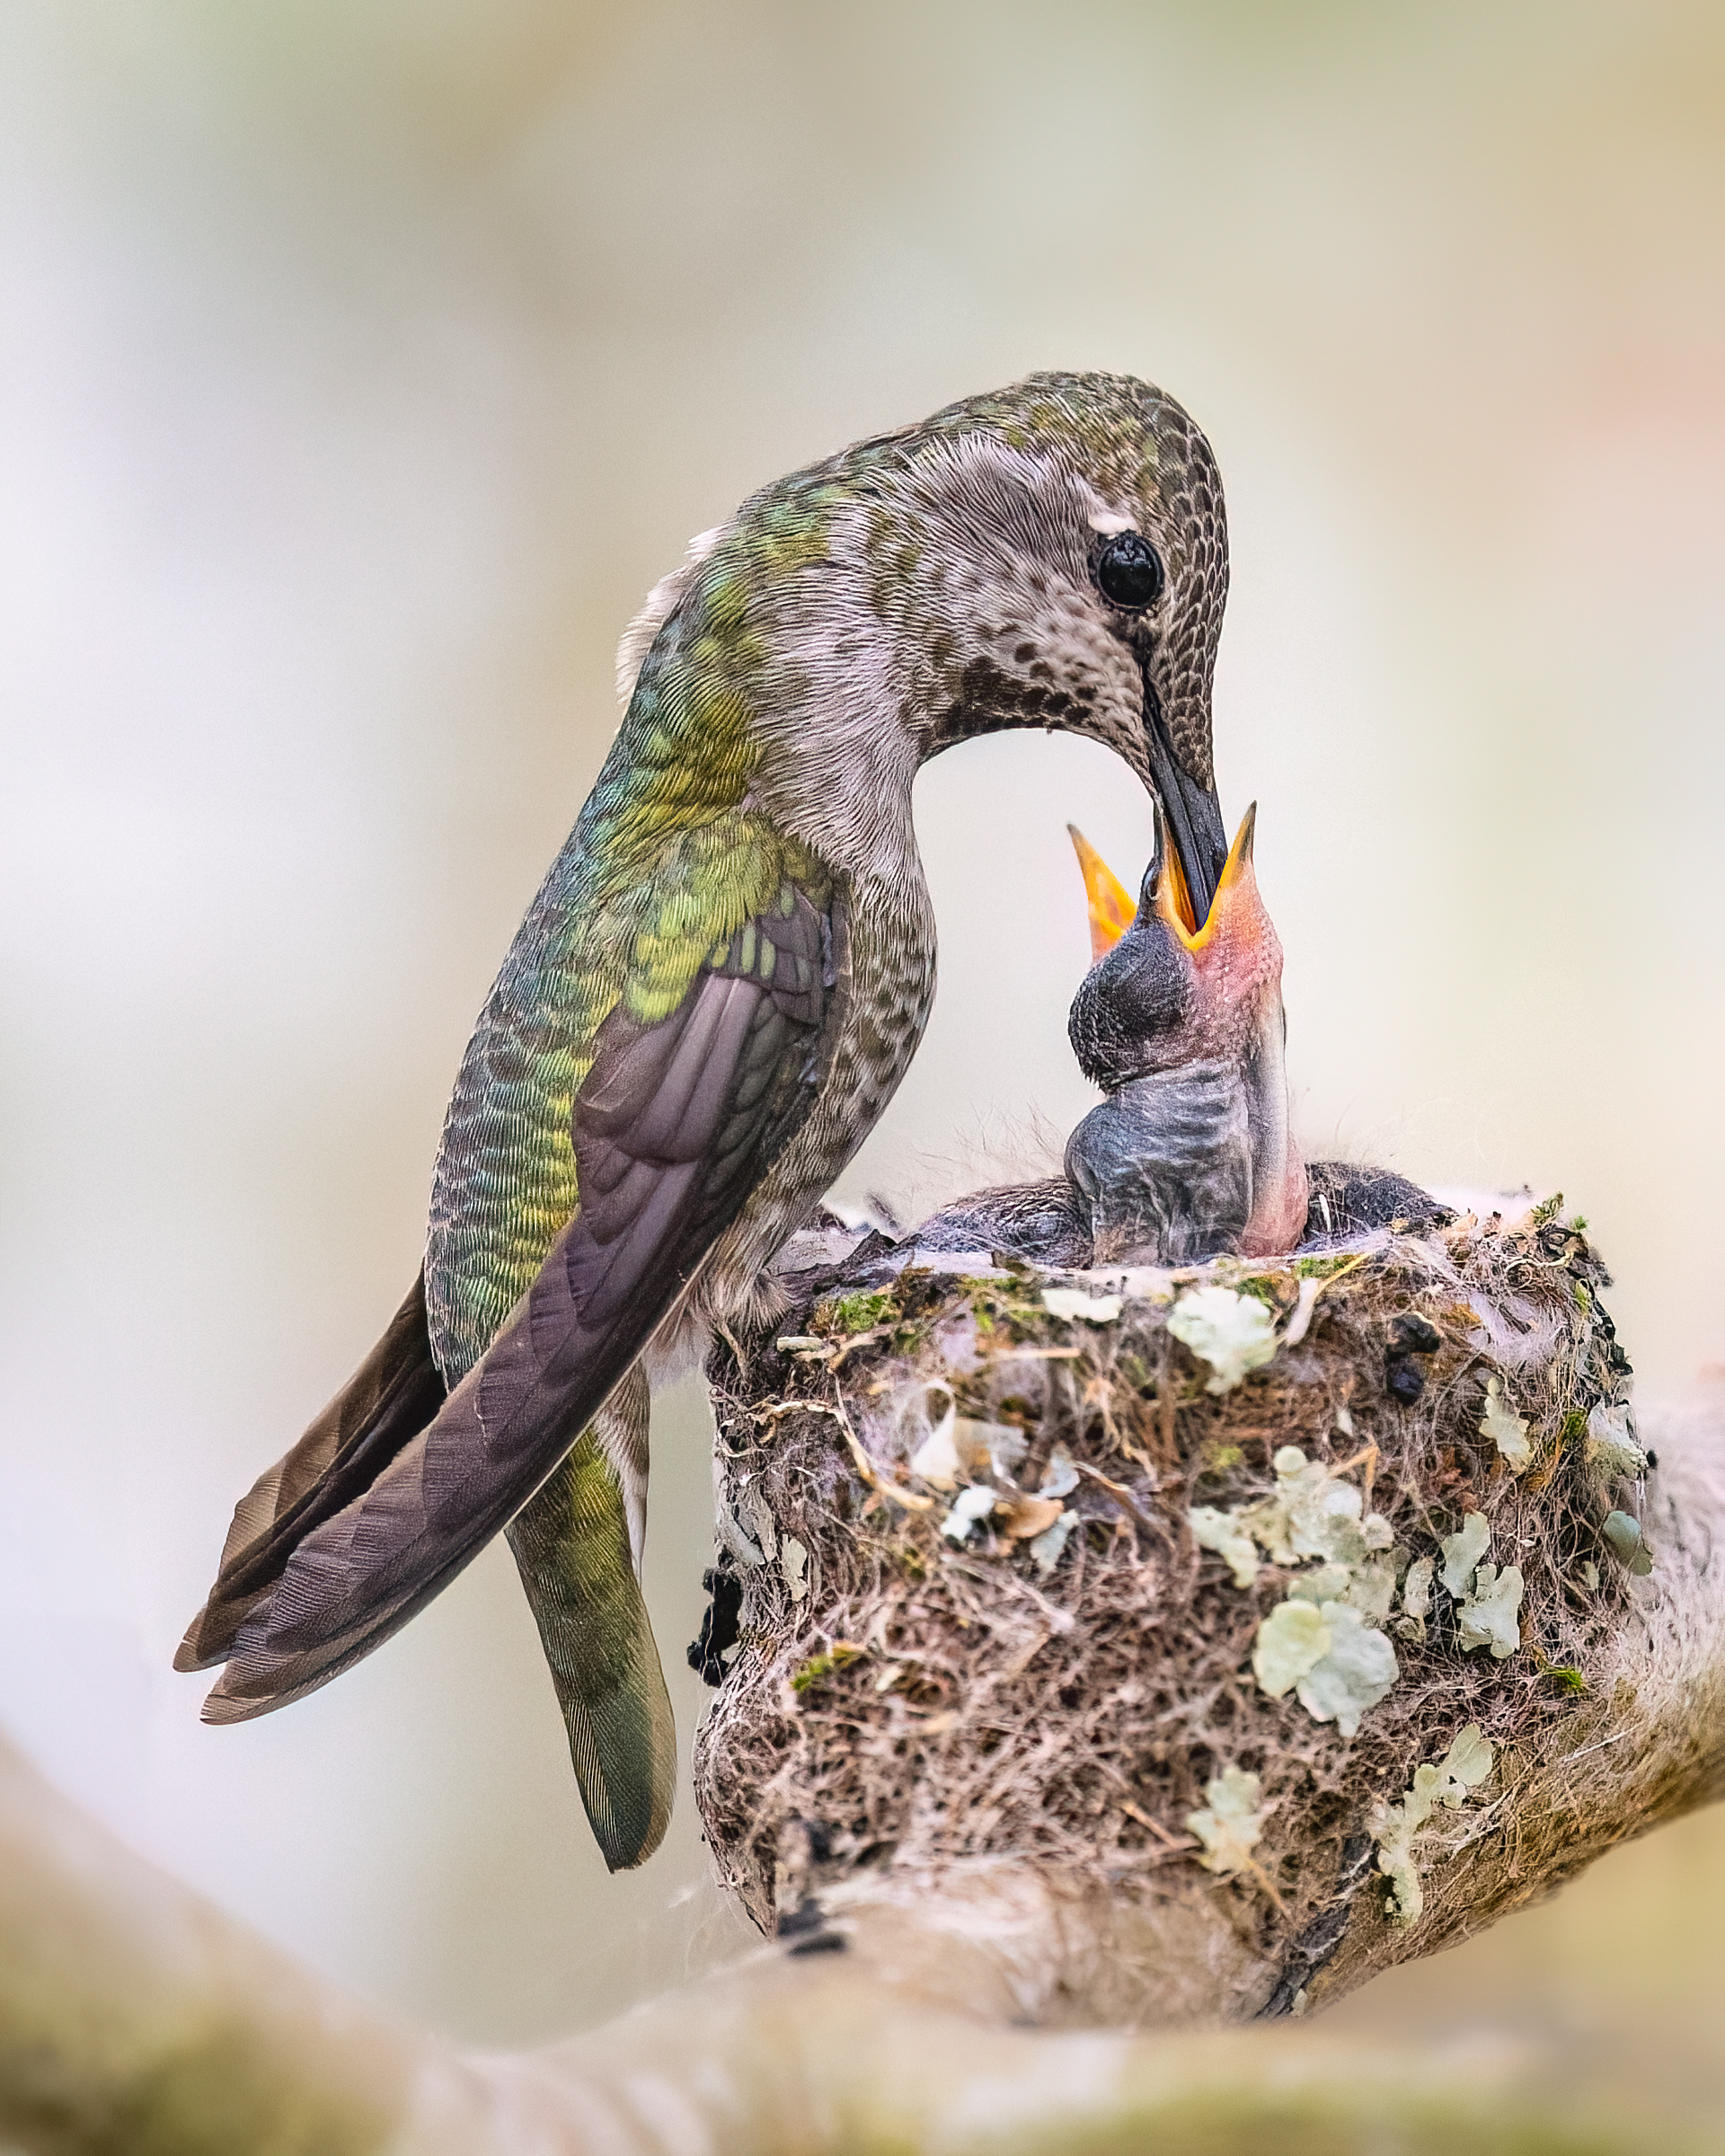 An Anna's Hummingbird returns to her nest to feed her two chicks. She pokes her long bill into the mouths of the birds to f...